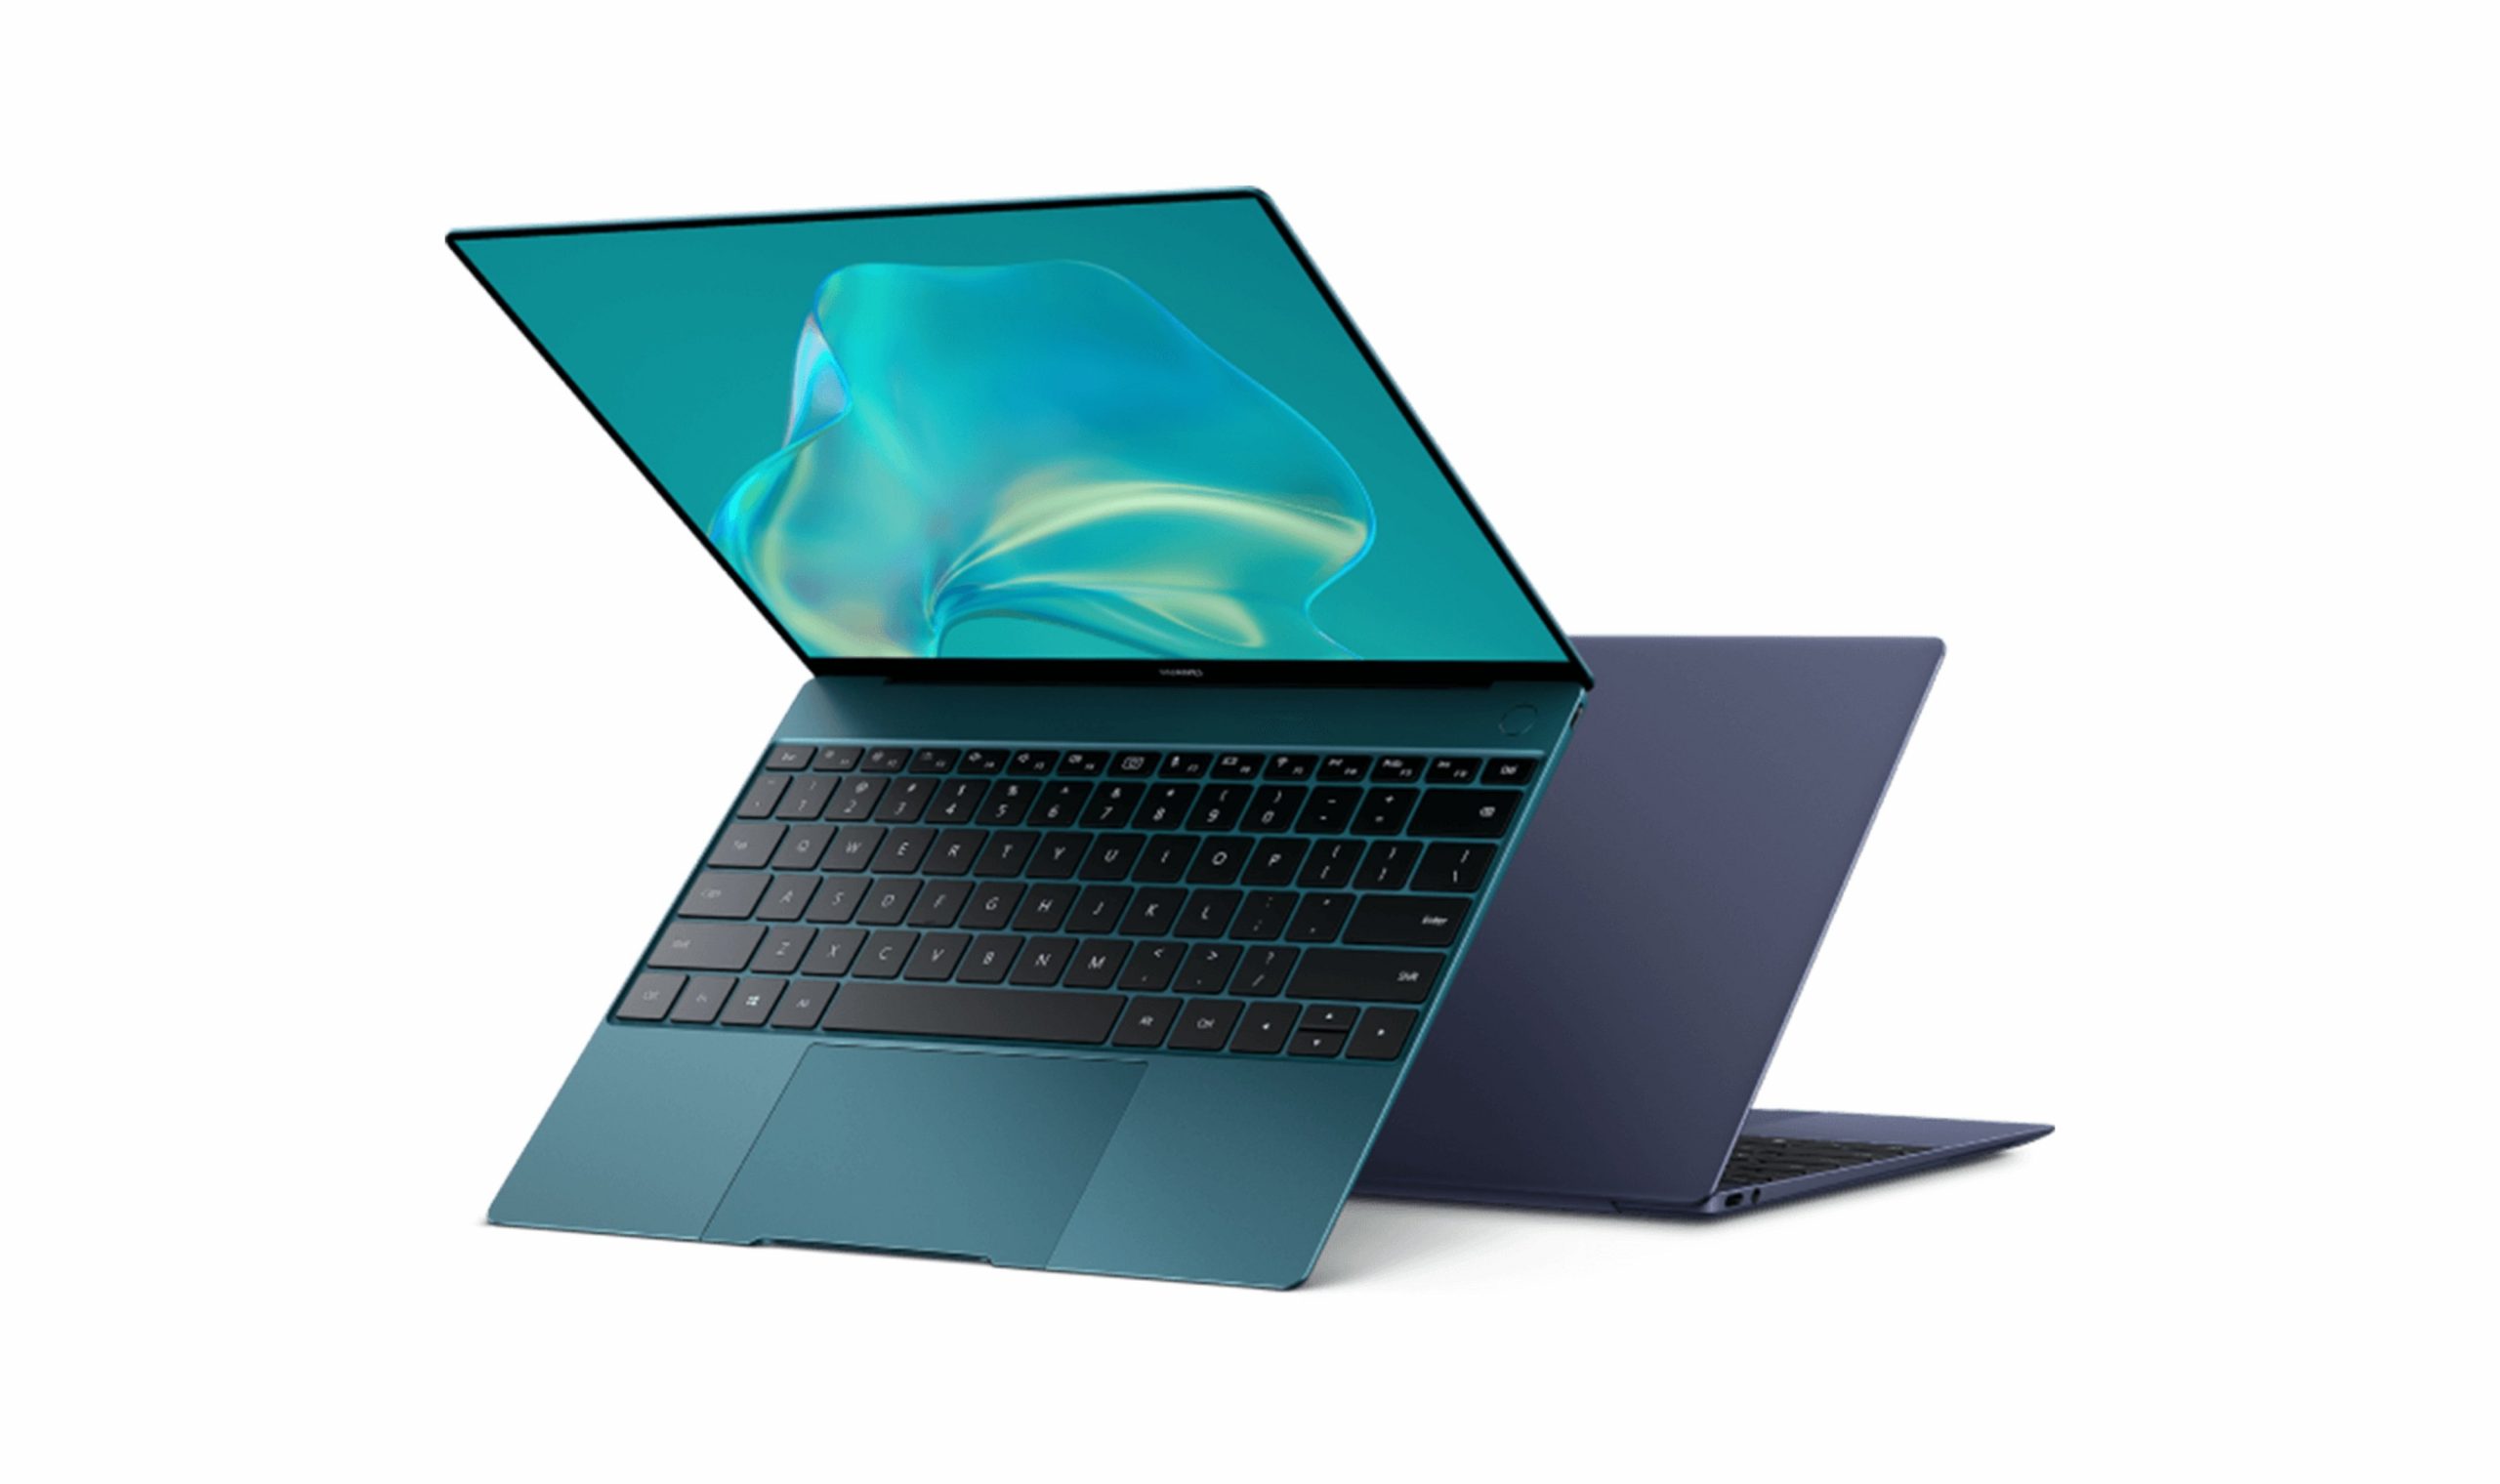 Huawei laptop powered by Intel’s 11th-gen processor gets benchmarked; might be a new MateBook X